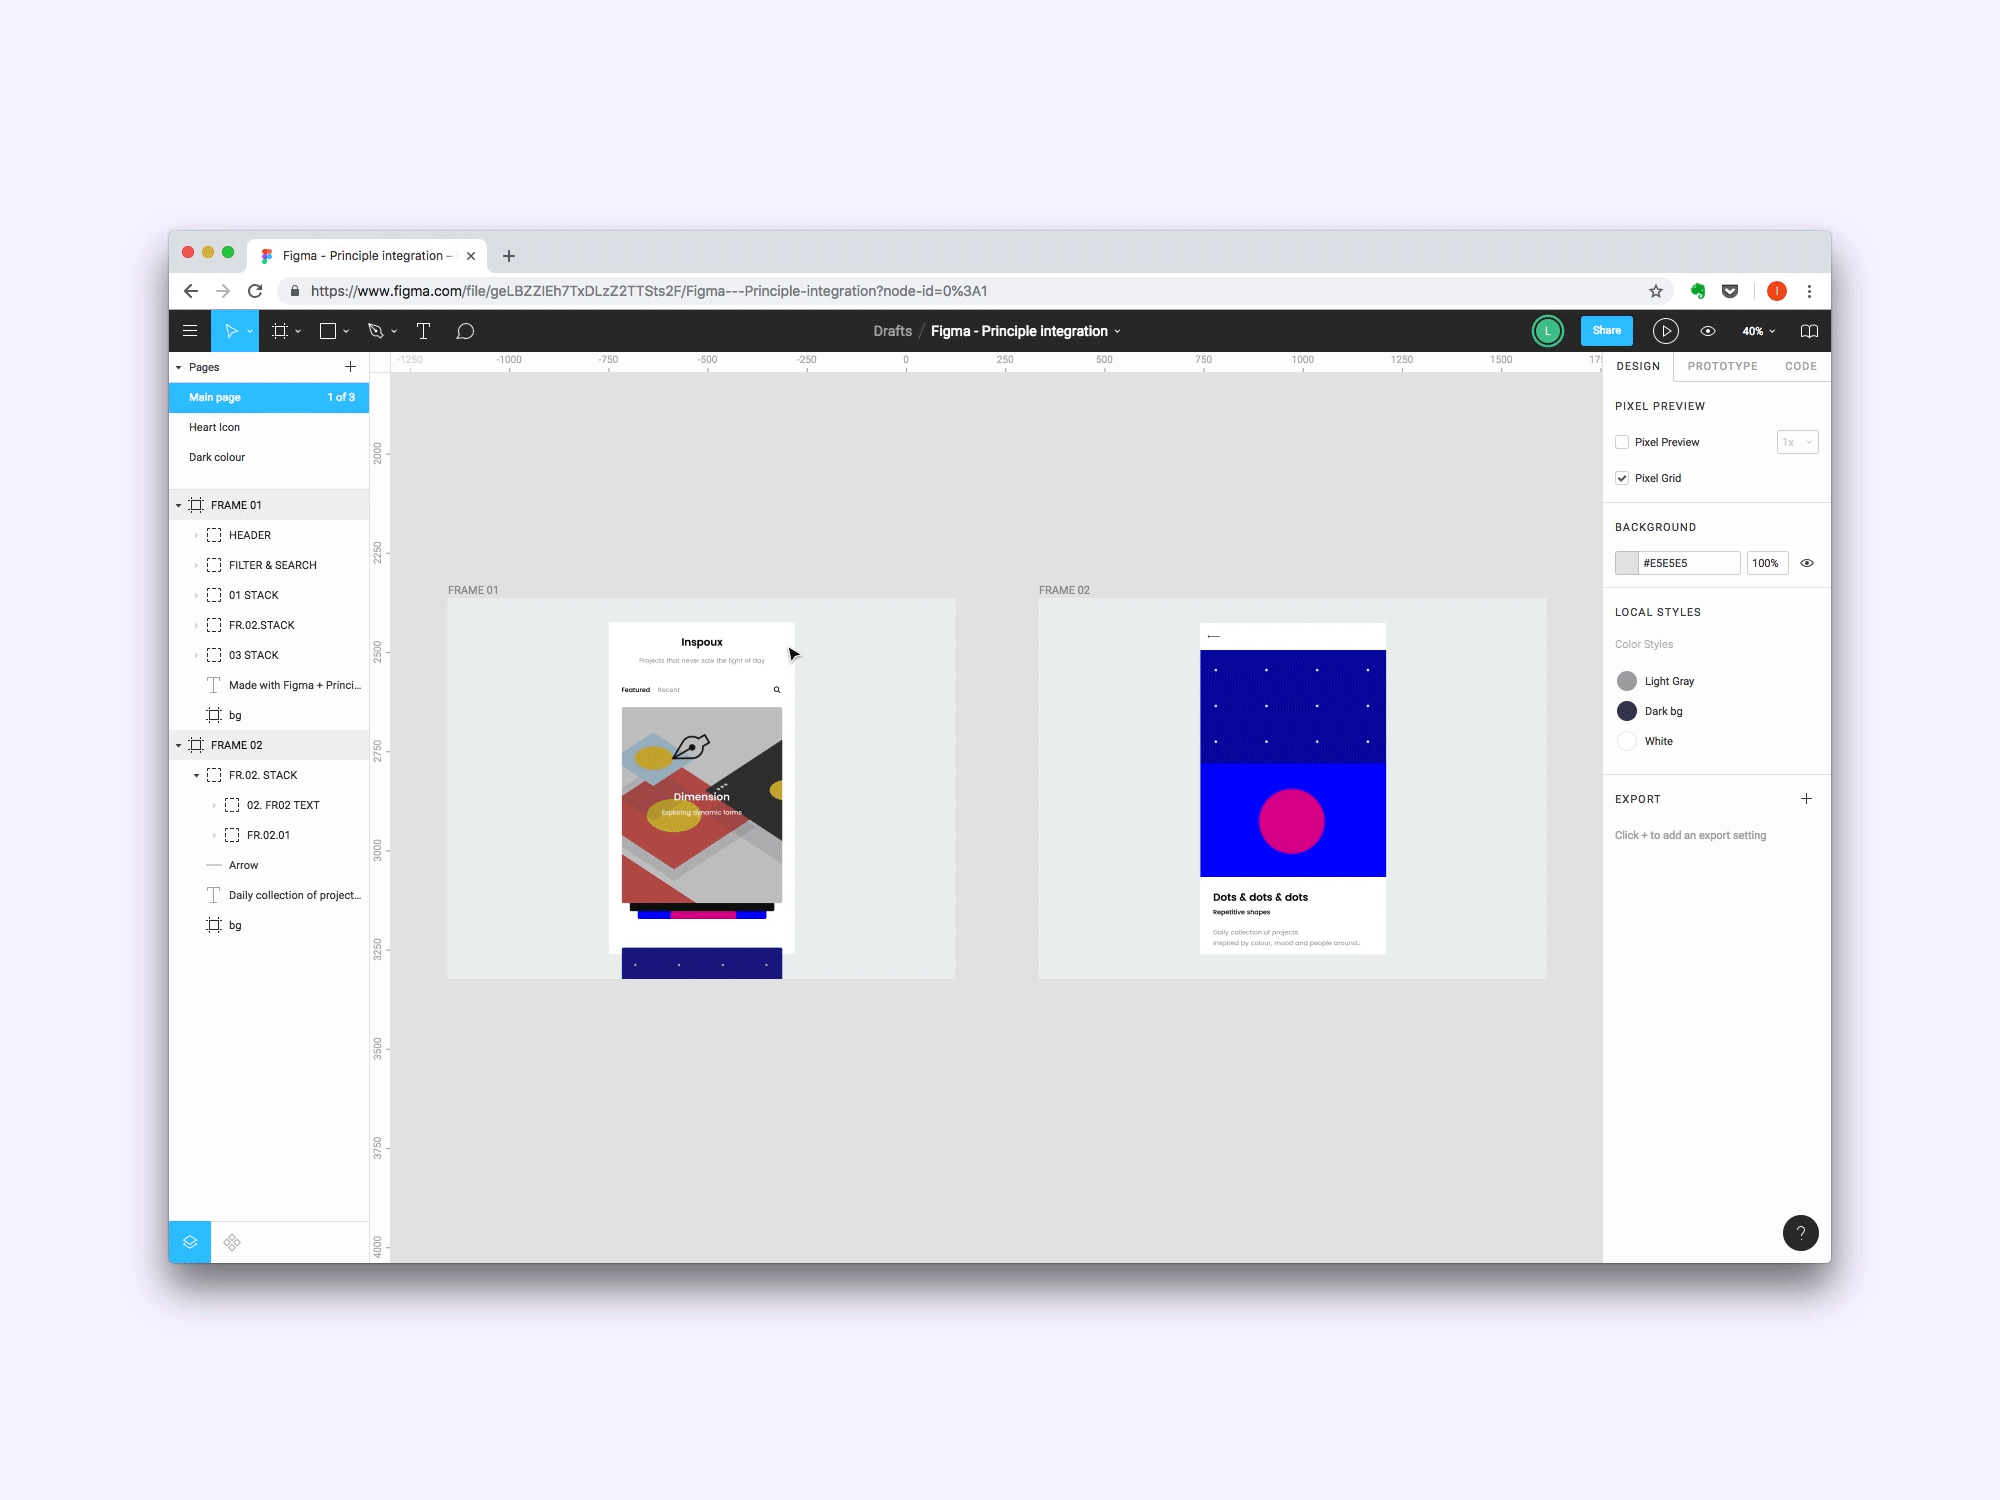 Animate your Figma designs with our new Principle integration